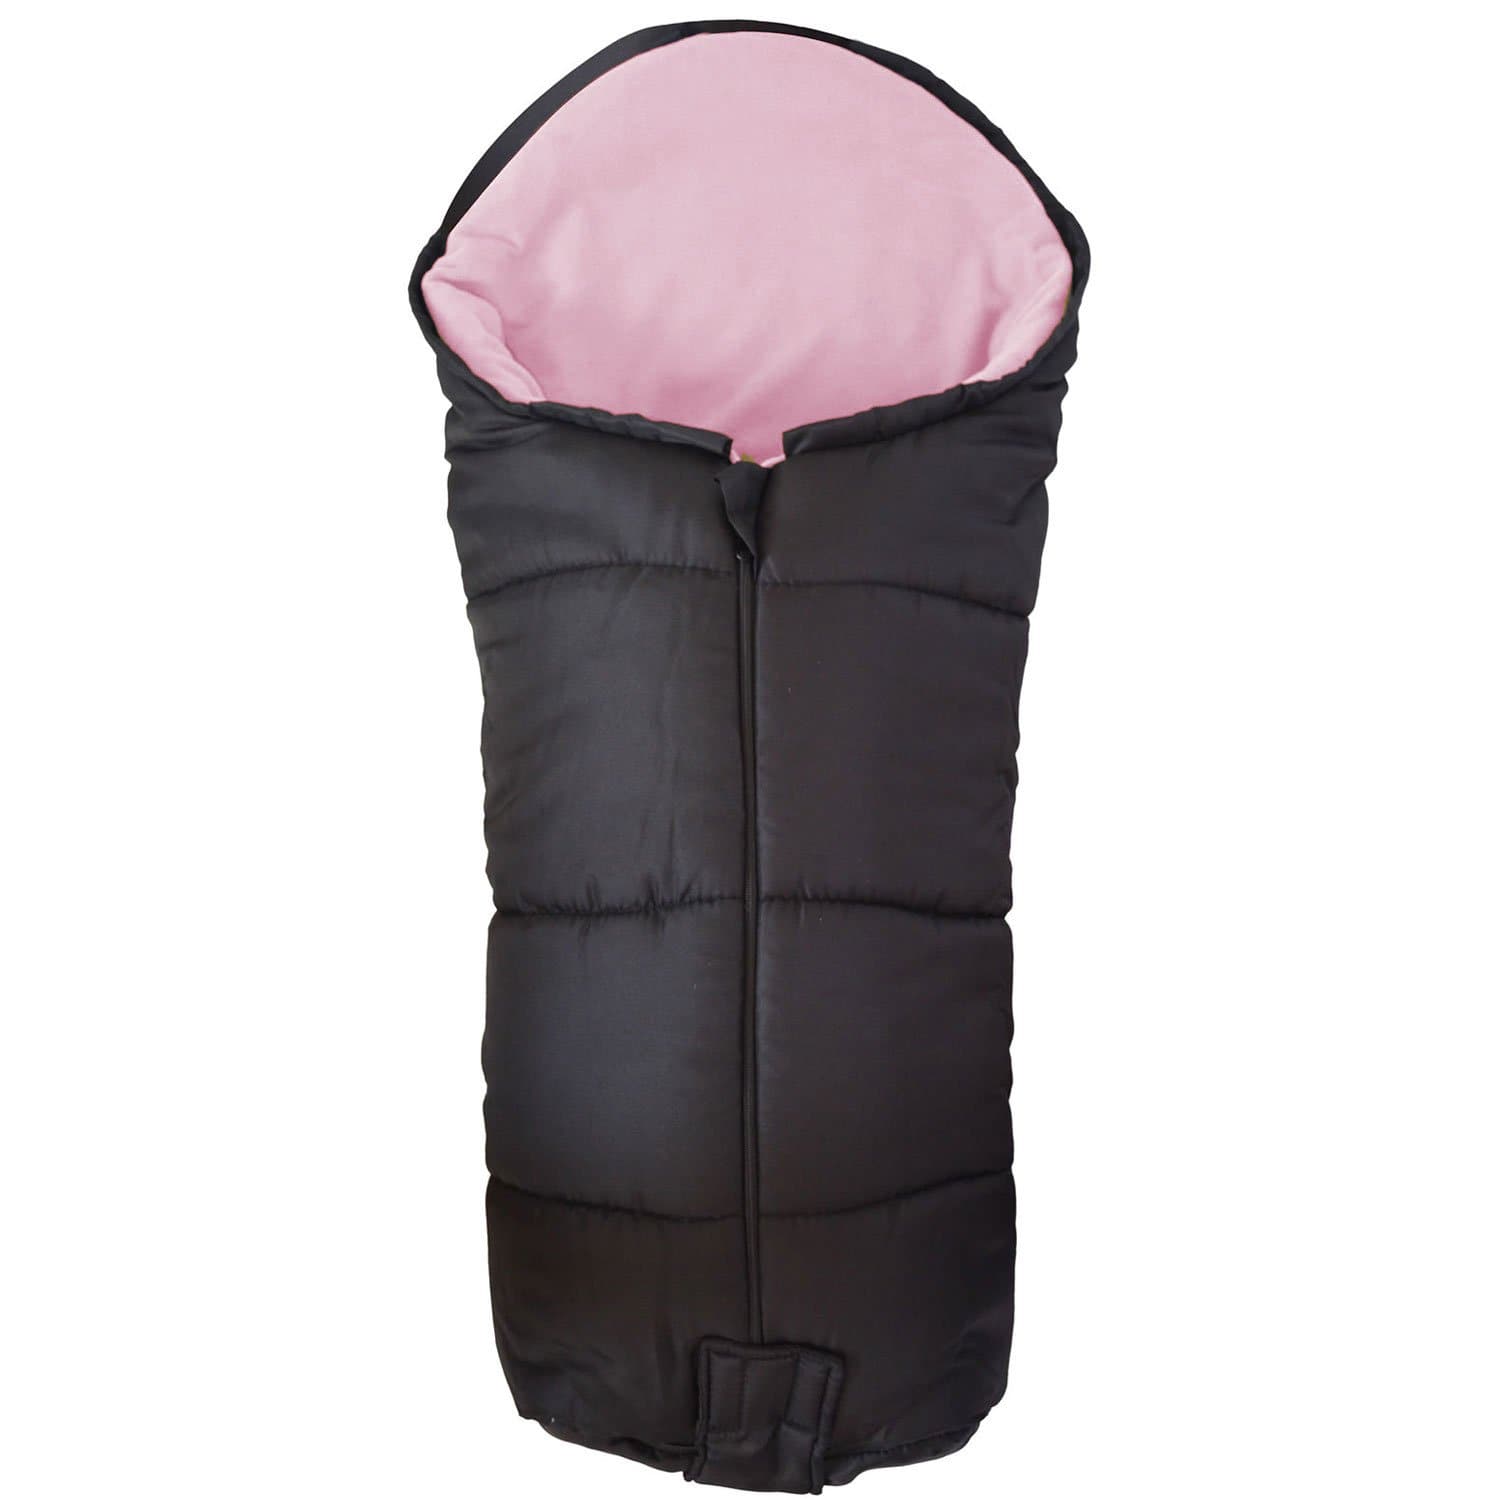 Deluxe Footmuff / Cosy Toes Compatible with Babyzen - Light Pink / Fits All Models | For Your Little One